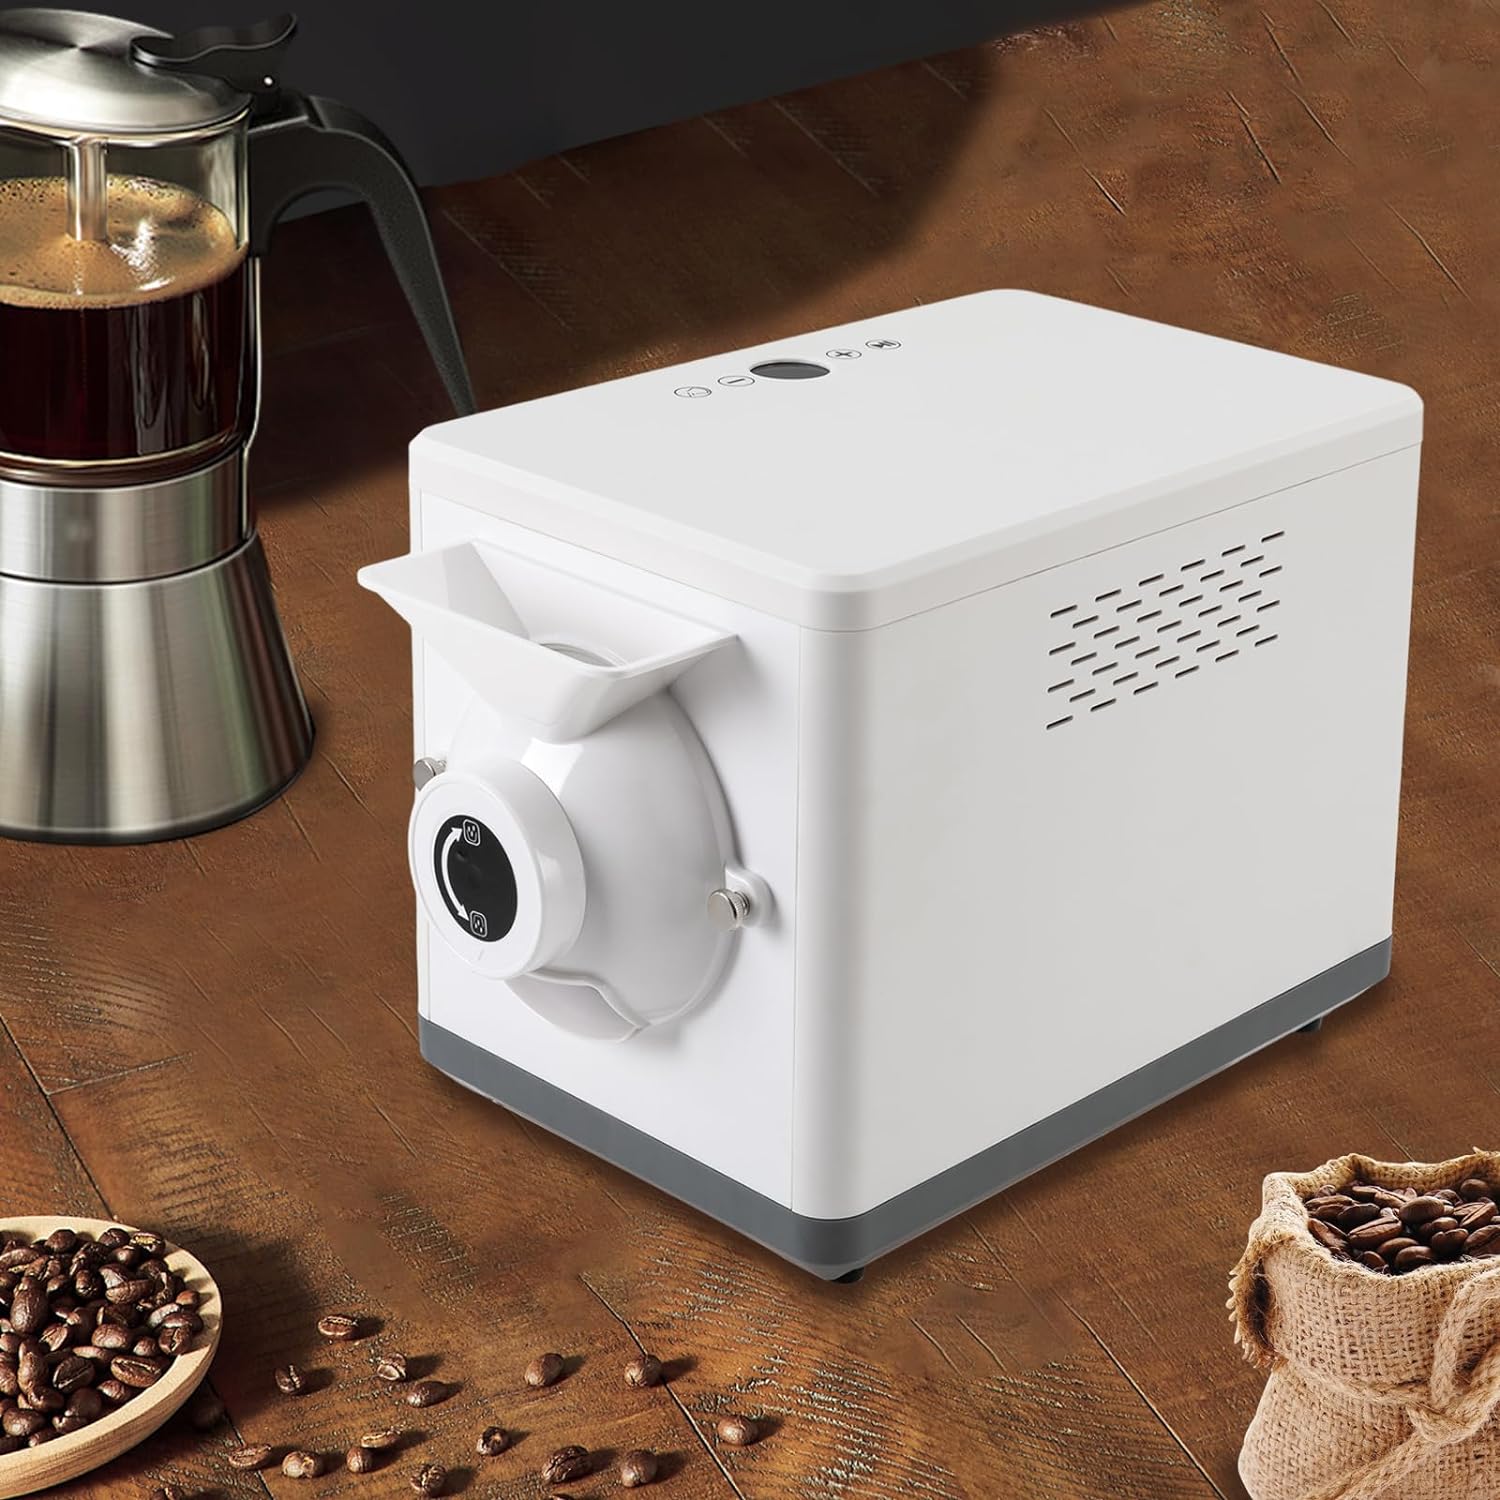 Kolhgnse Electric Coffee Roaster Machine,Offee Bean Baker Roaster, Coffee Bean Roasting Machine For Commercial Home Use,Commercial Roaster,Nut Peanut Bean Home Coffee Roaster